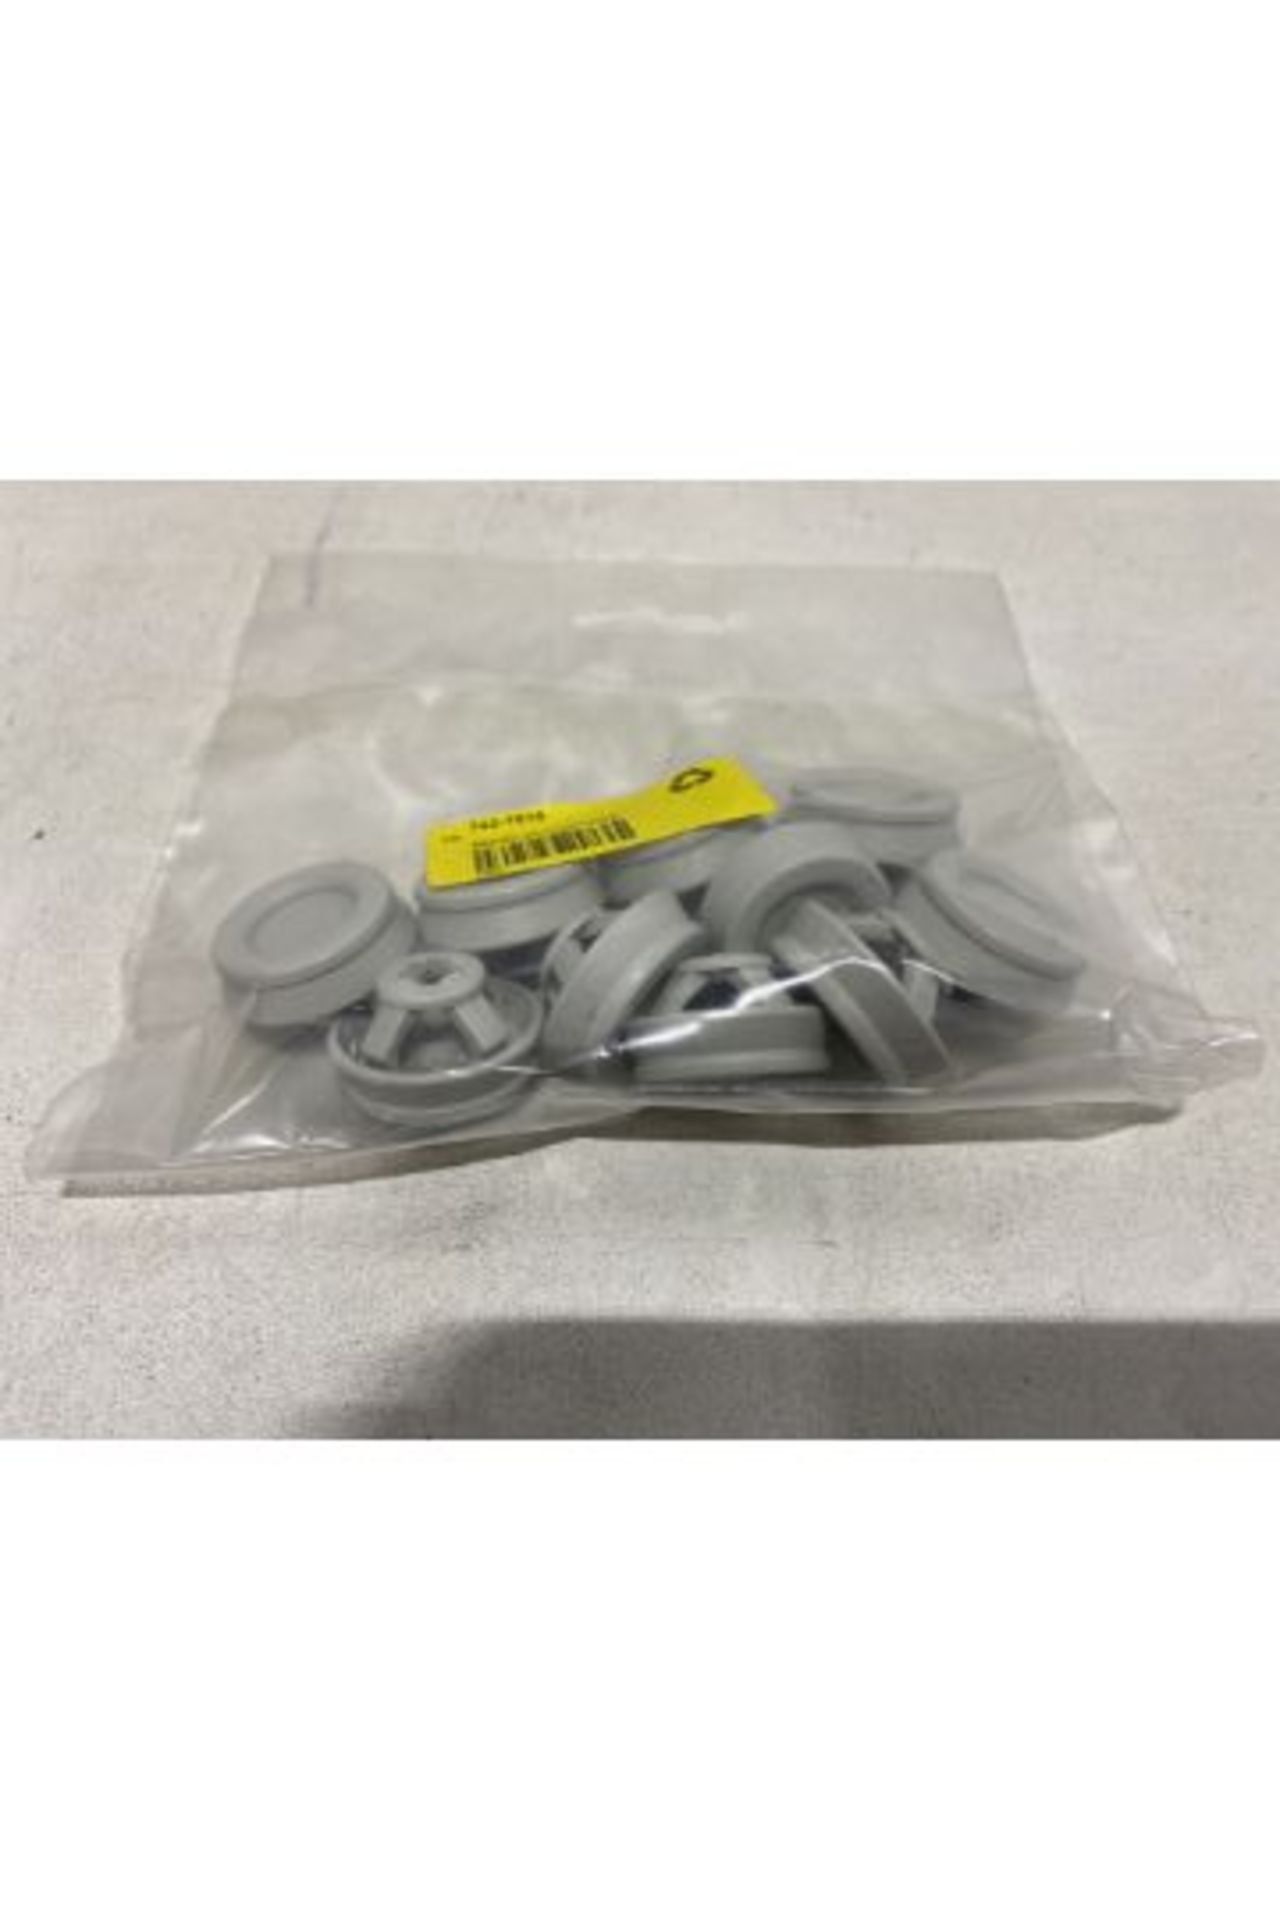 Approximately 5,900 x WISKA Polypropylene Thermoplastic Round Cable Grommets | 20mm - Image 3 of 3